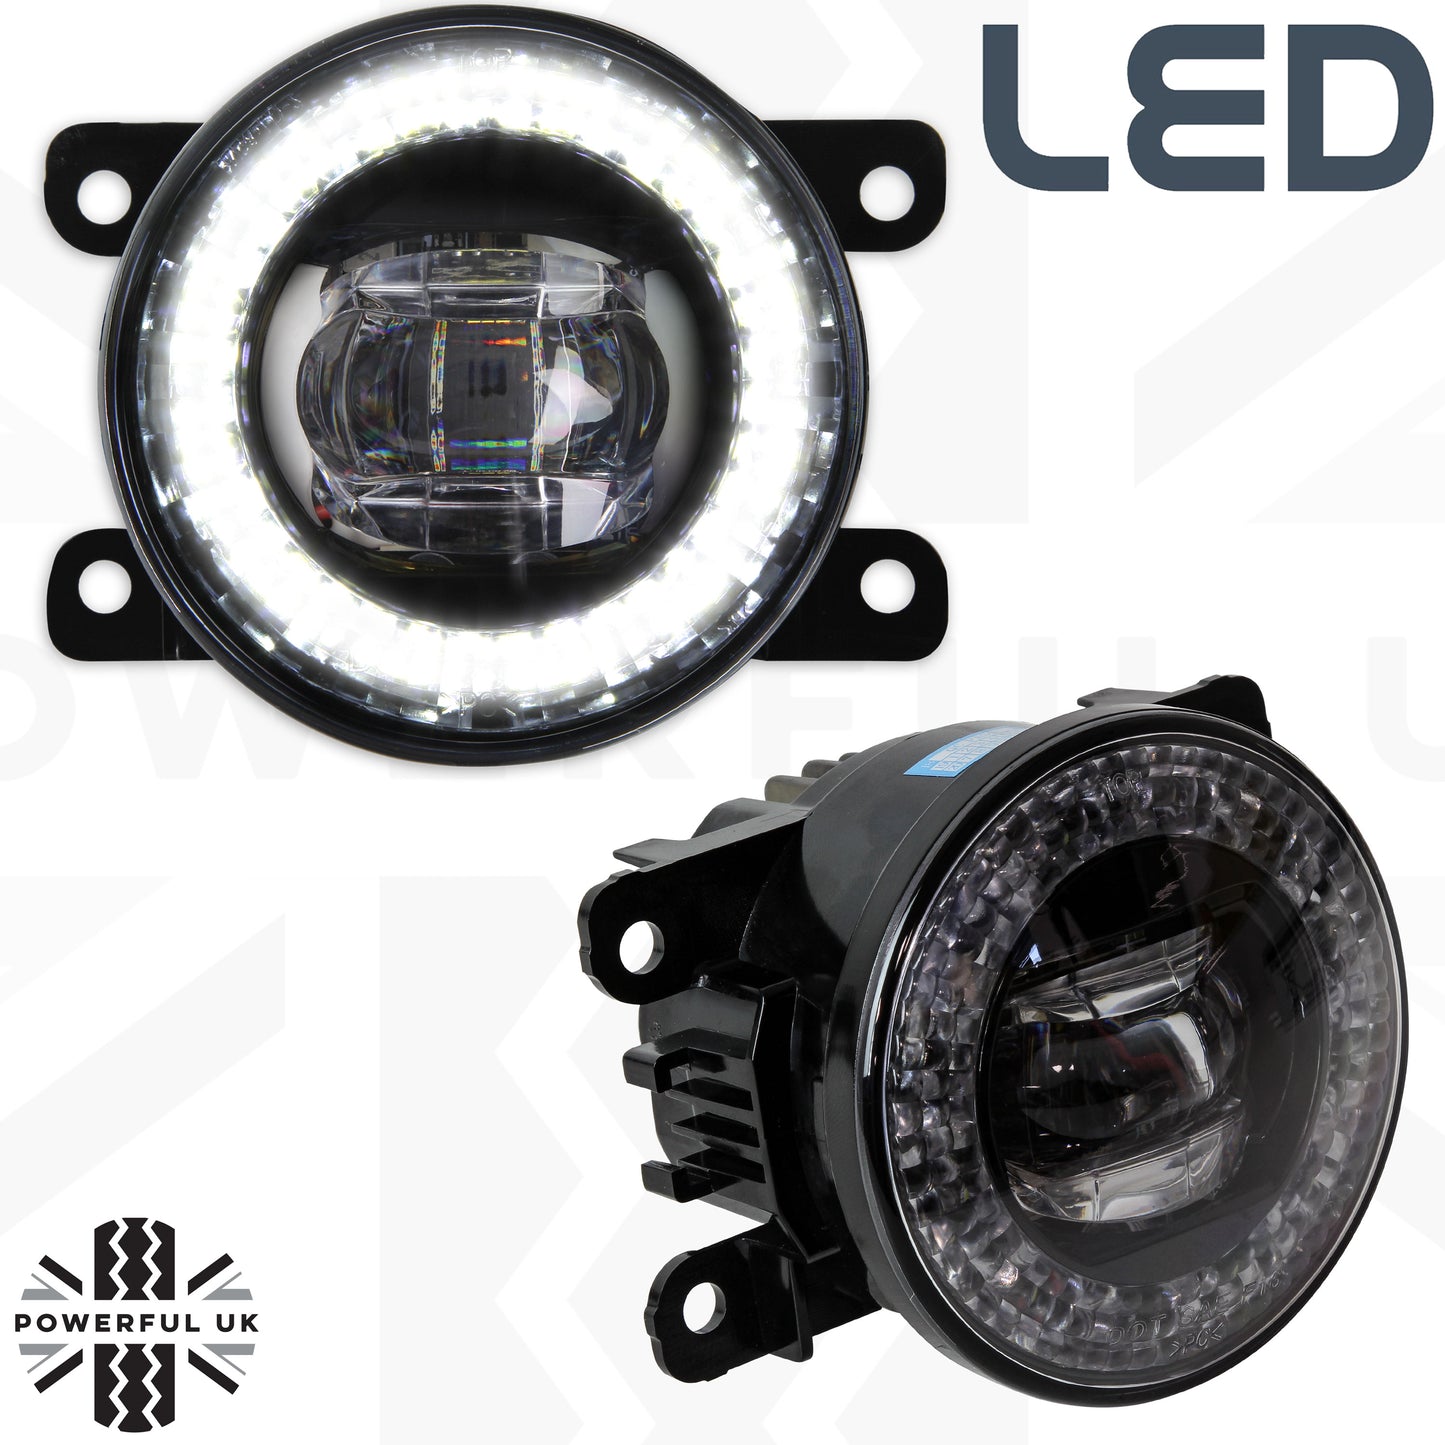 2 in 1 LED Fog/DRL lamp for Suzuki Jimny (fits all years)